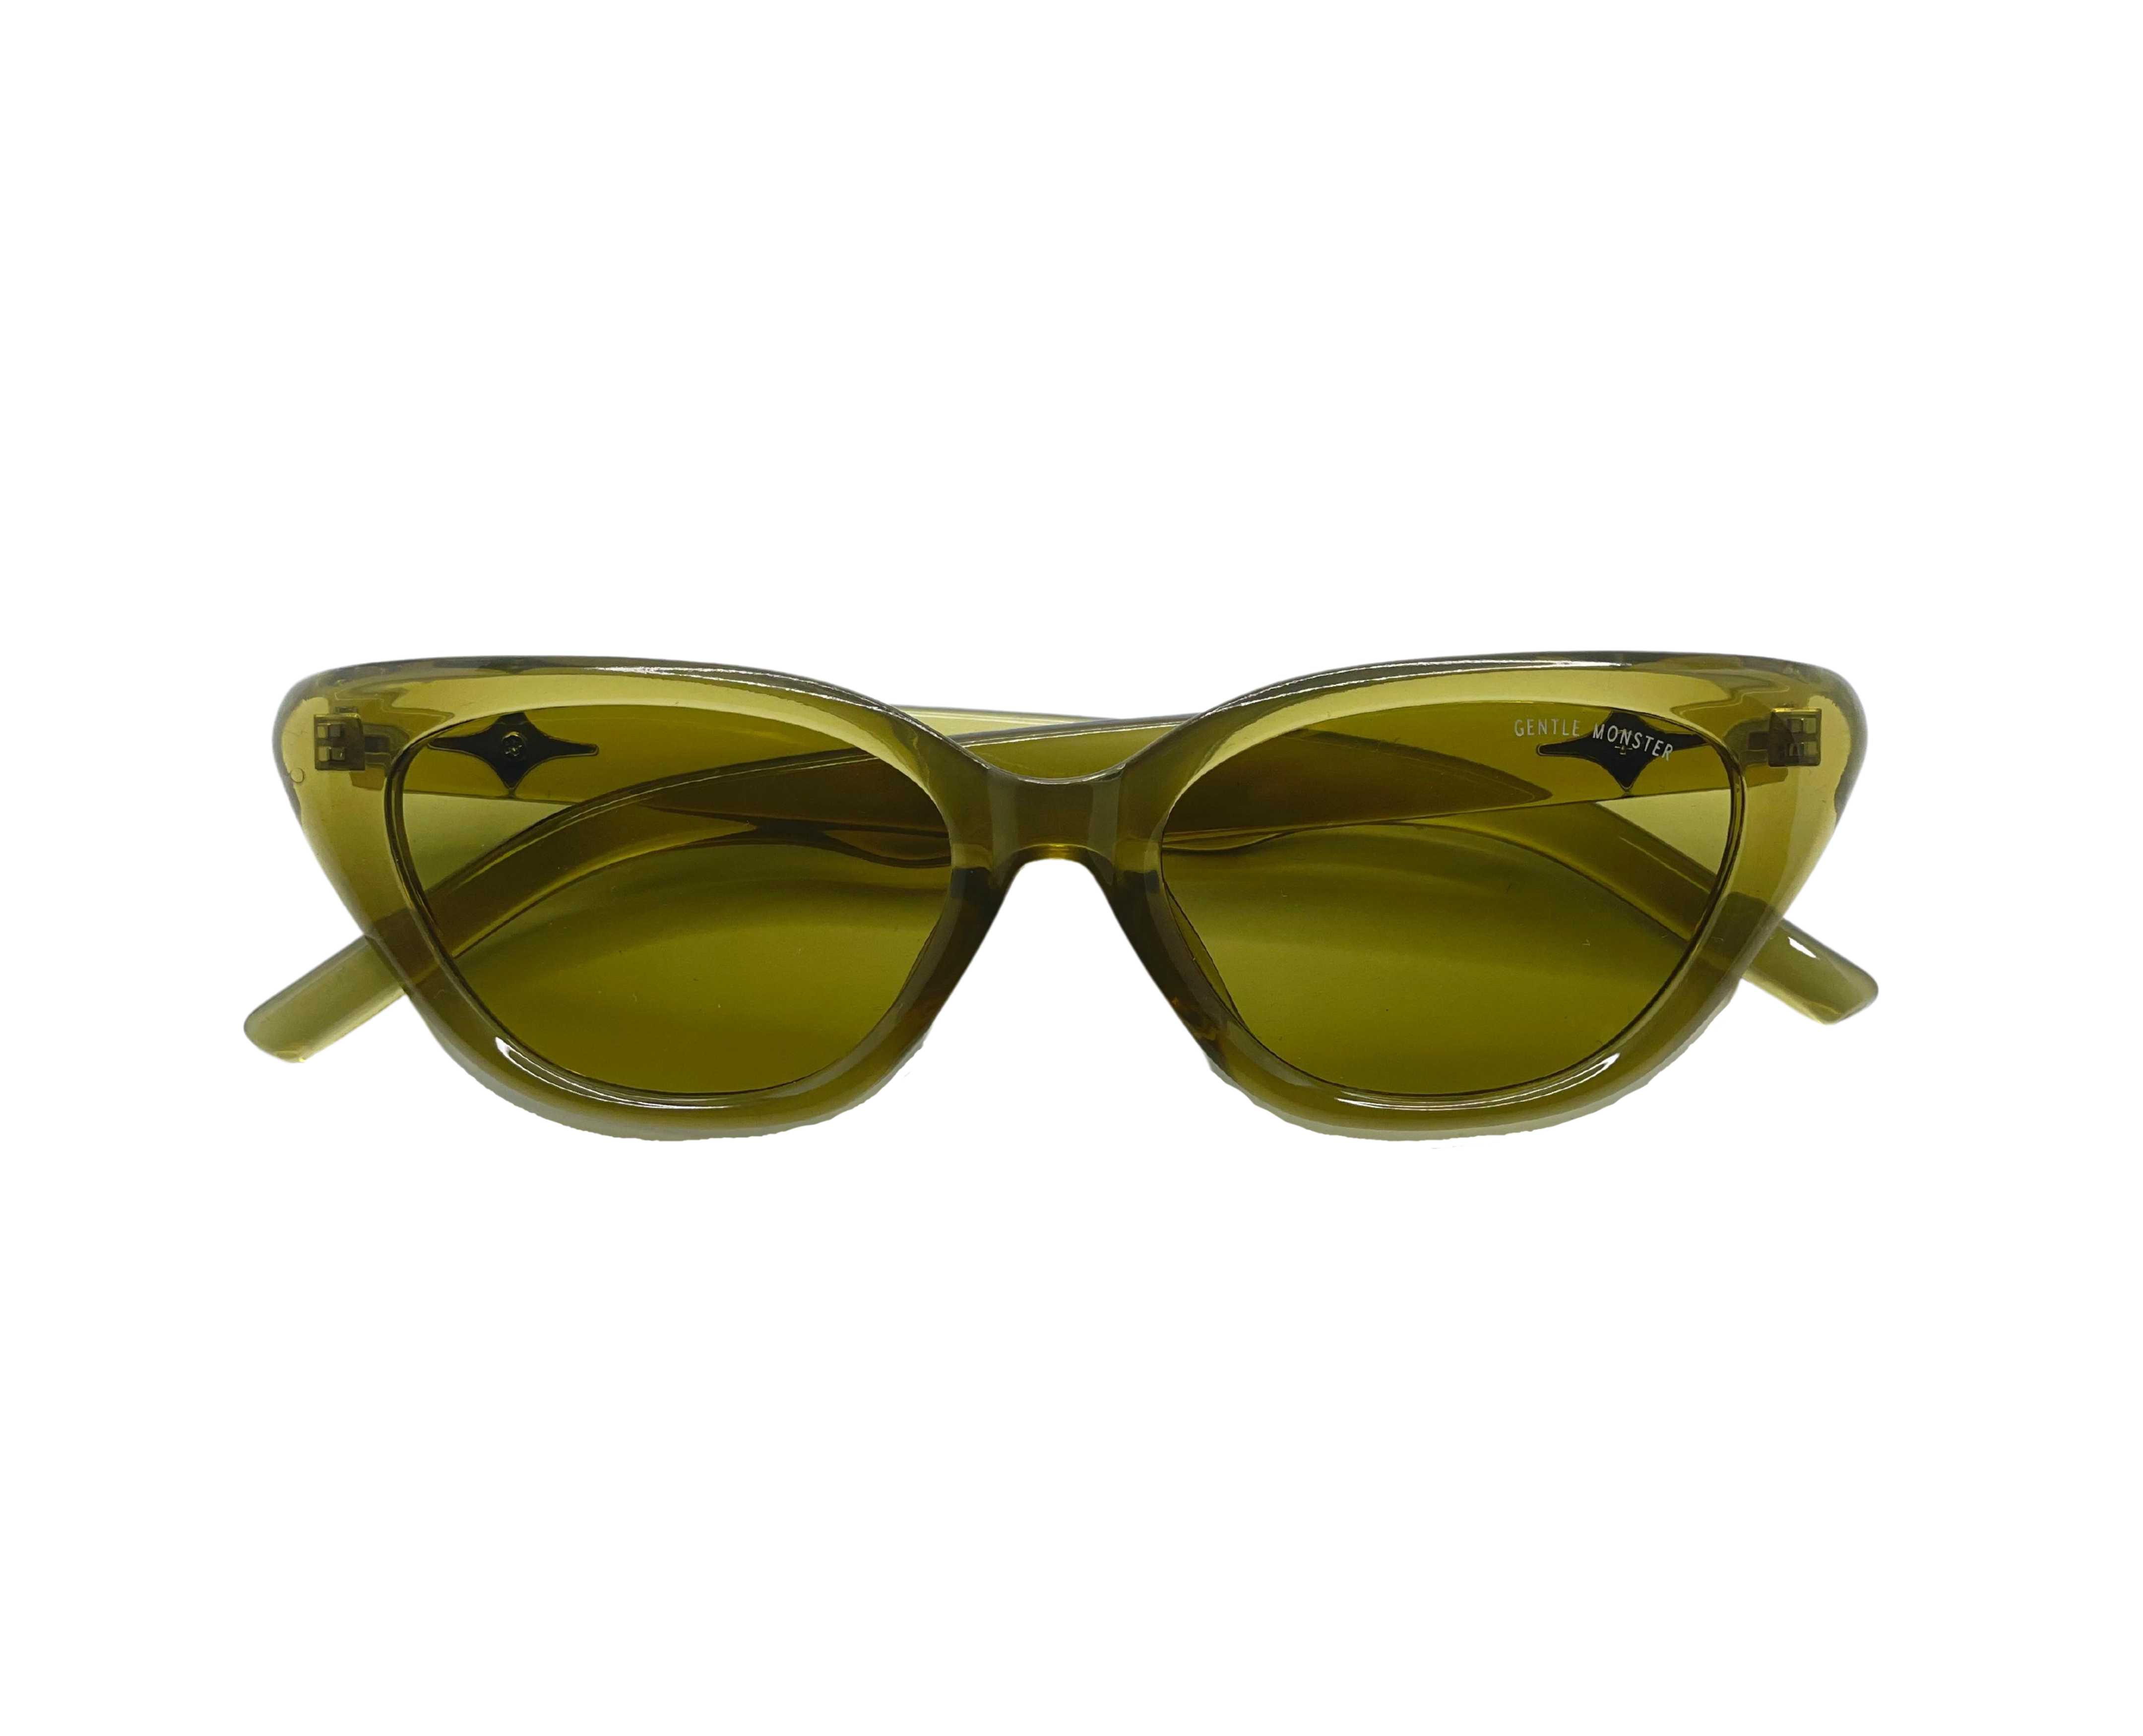 NS Deluxe - 9156 - Olive - Sunglasses